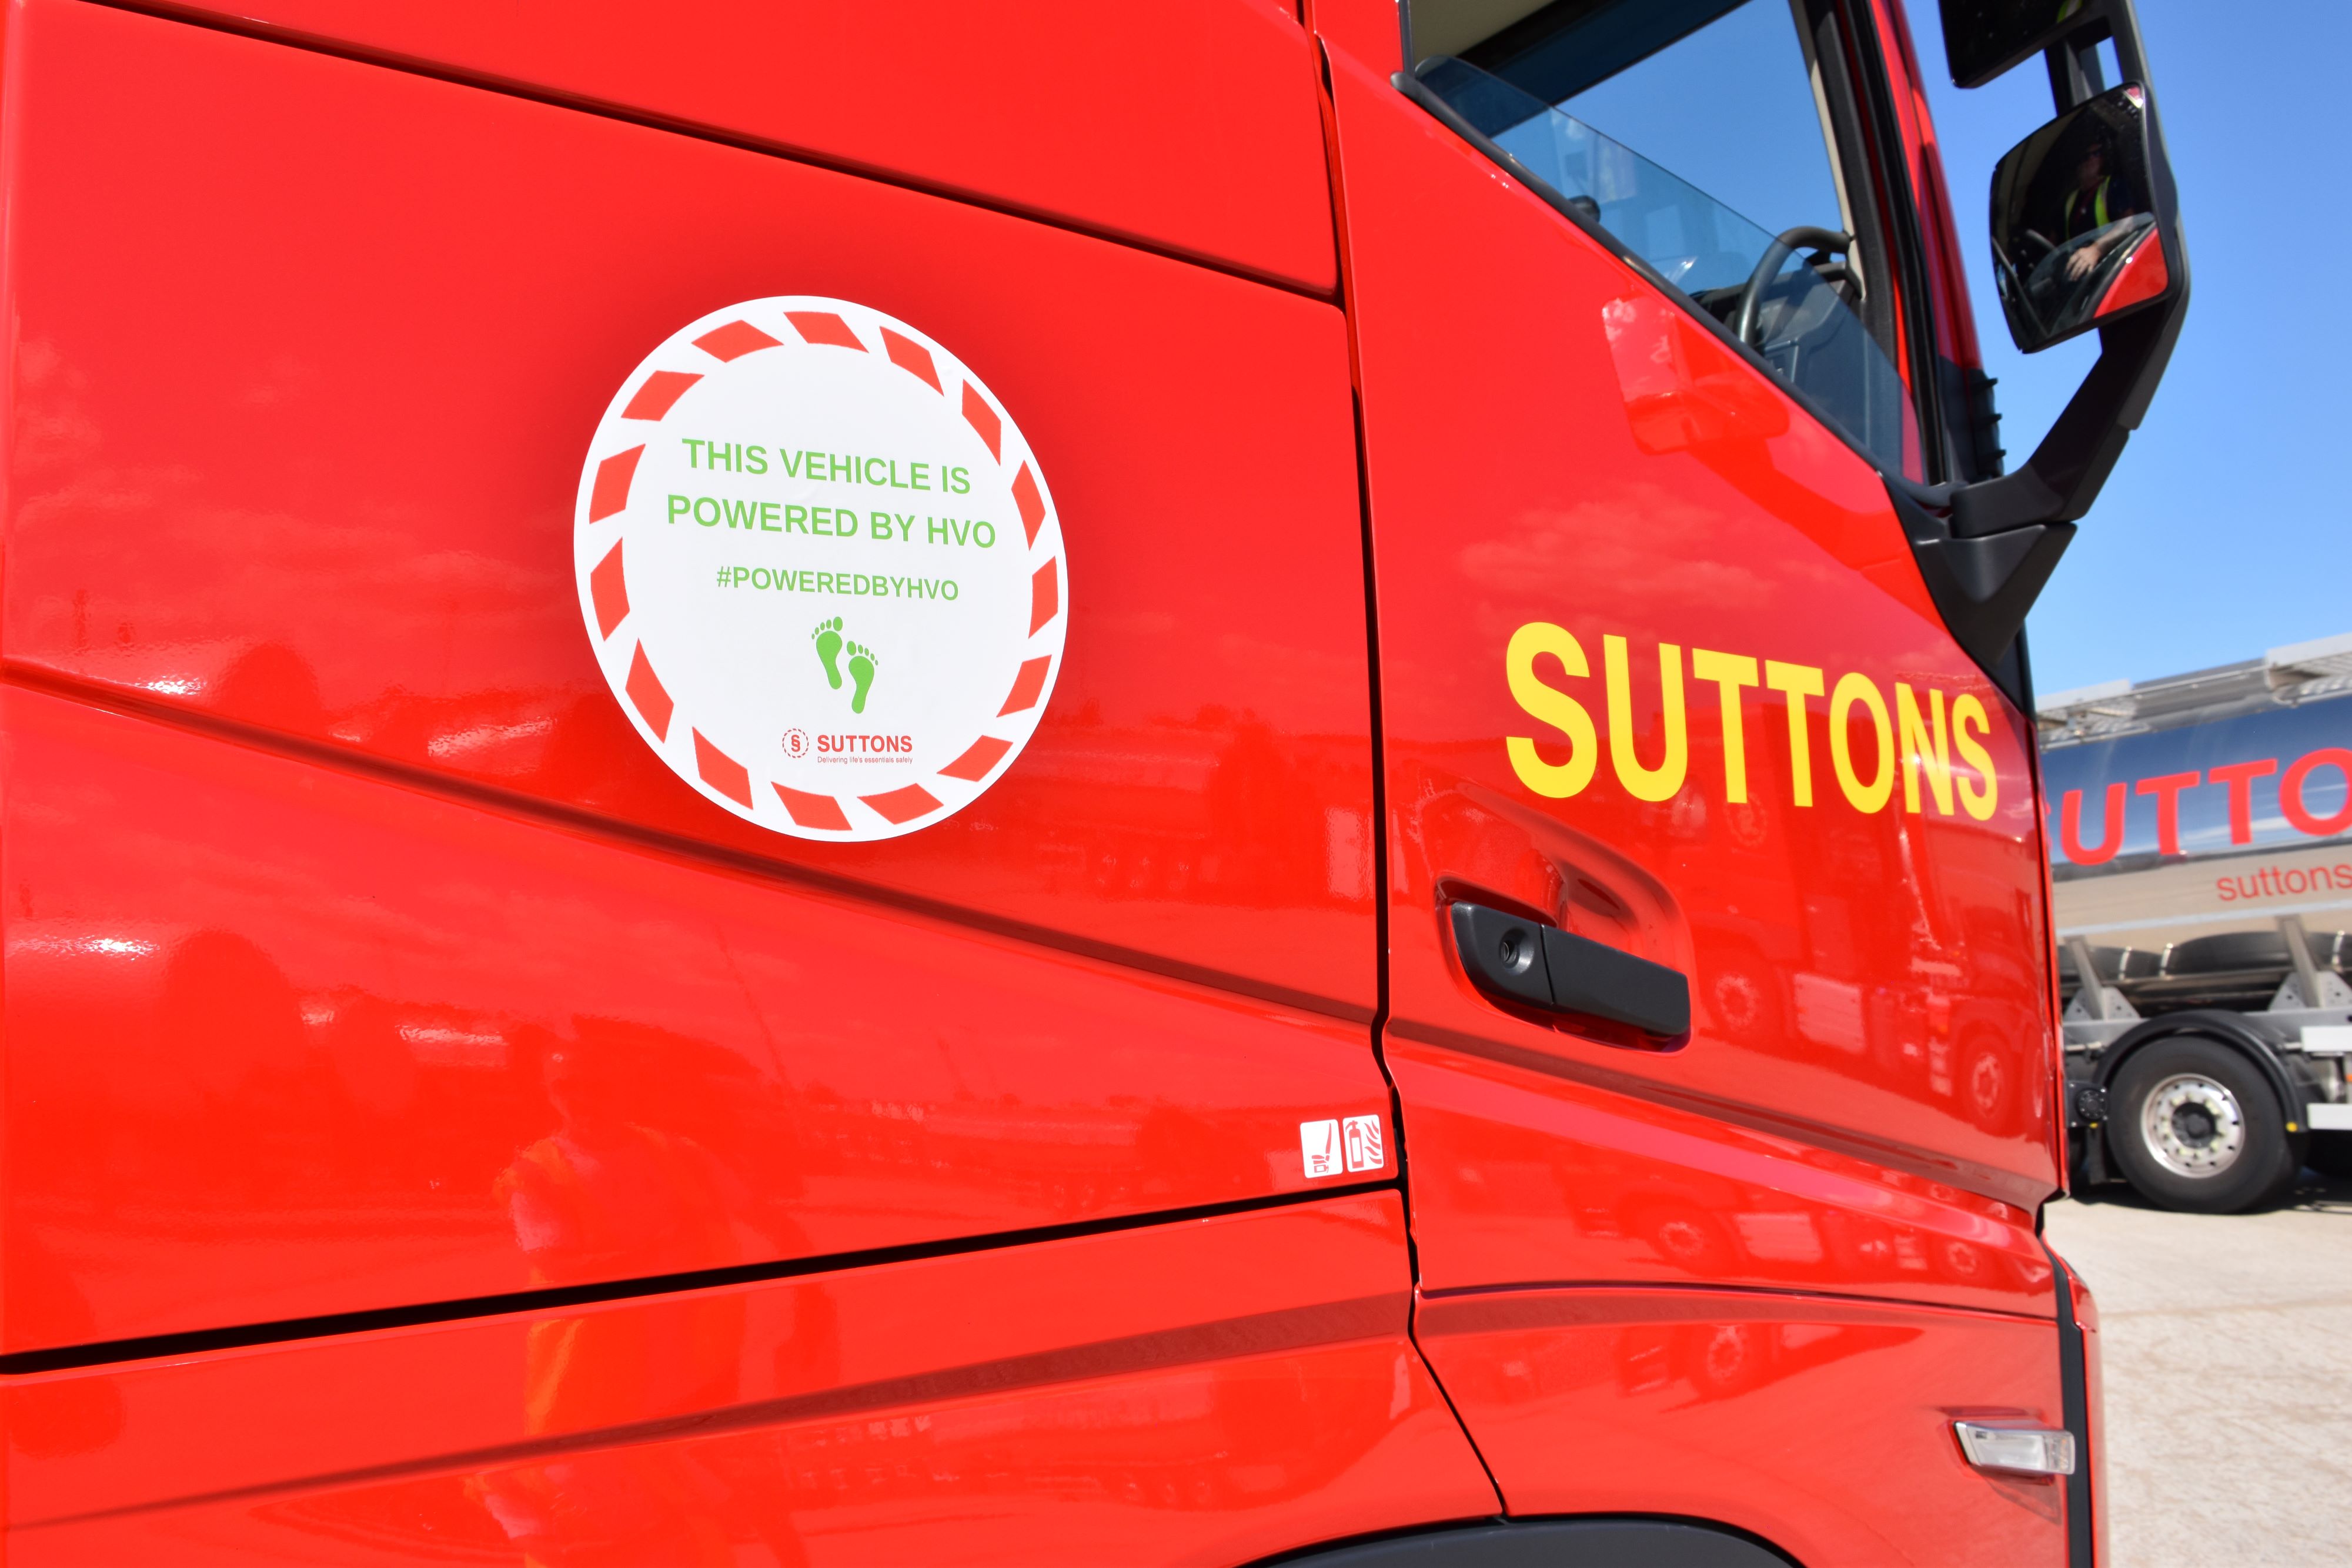 Suttons vehicle powered by HVO with decal